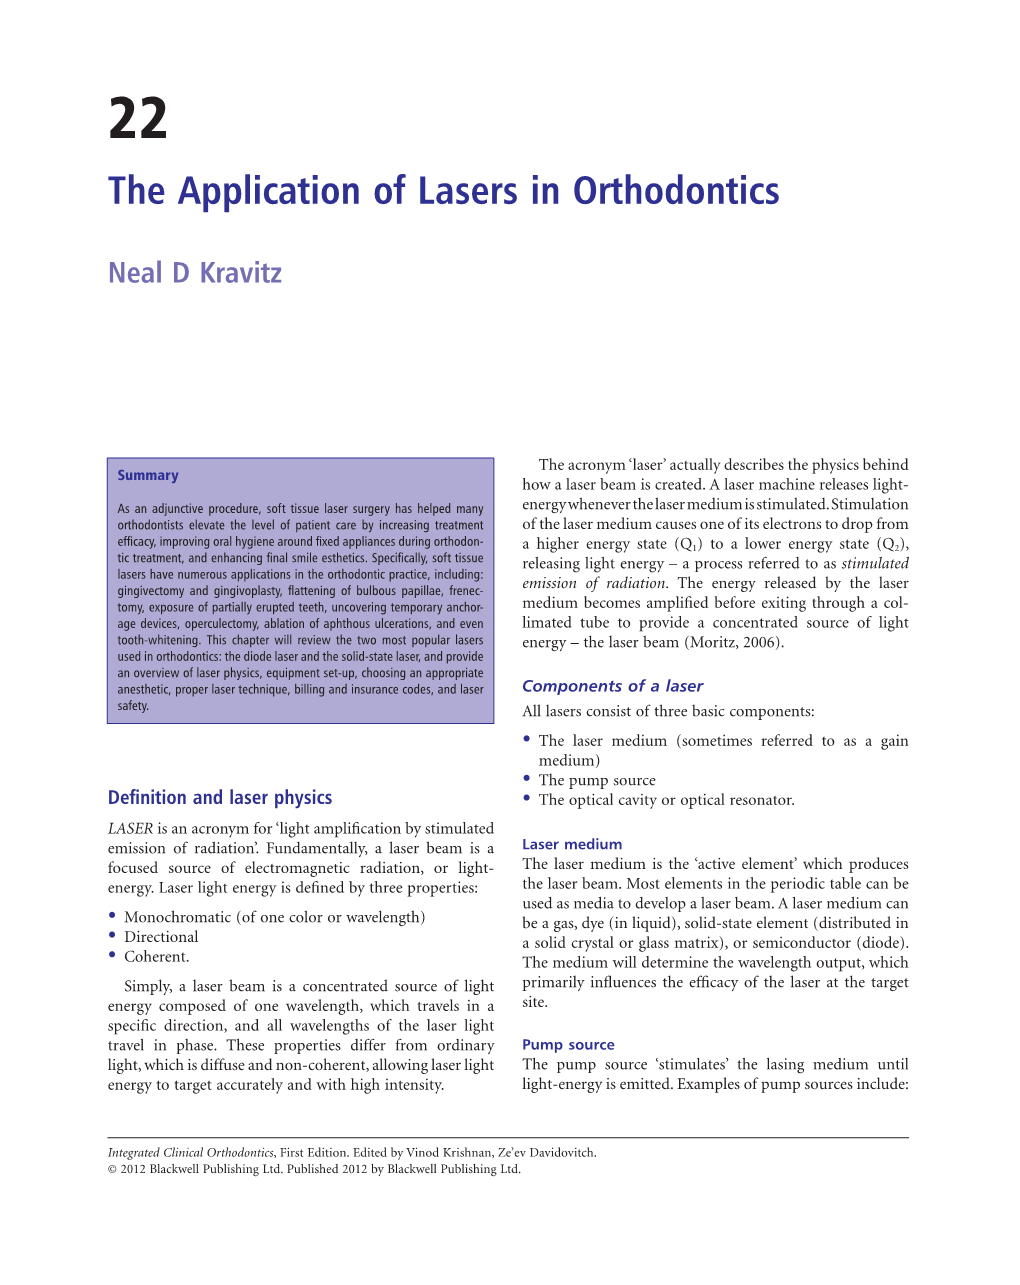 The Application of Lasers in Orthodontics